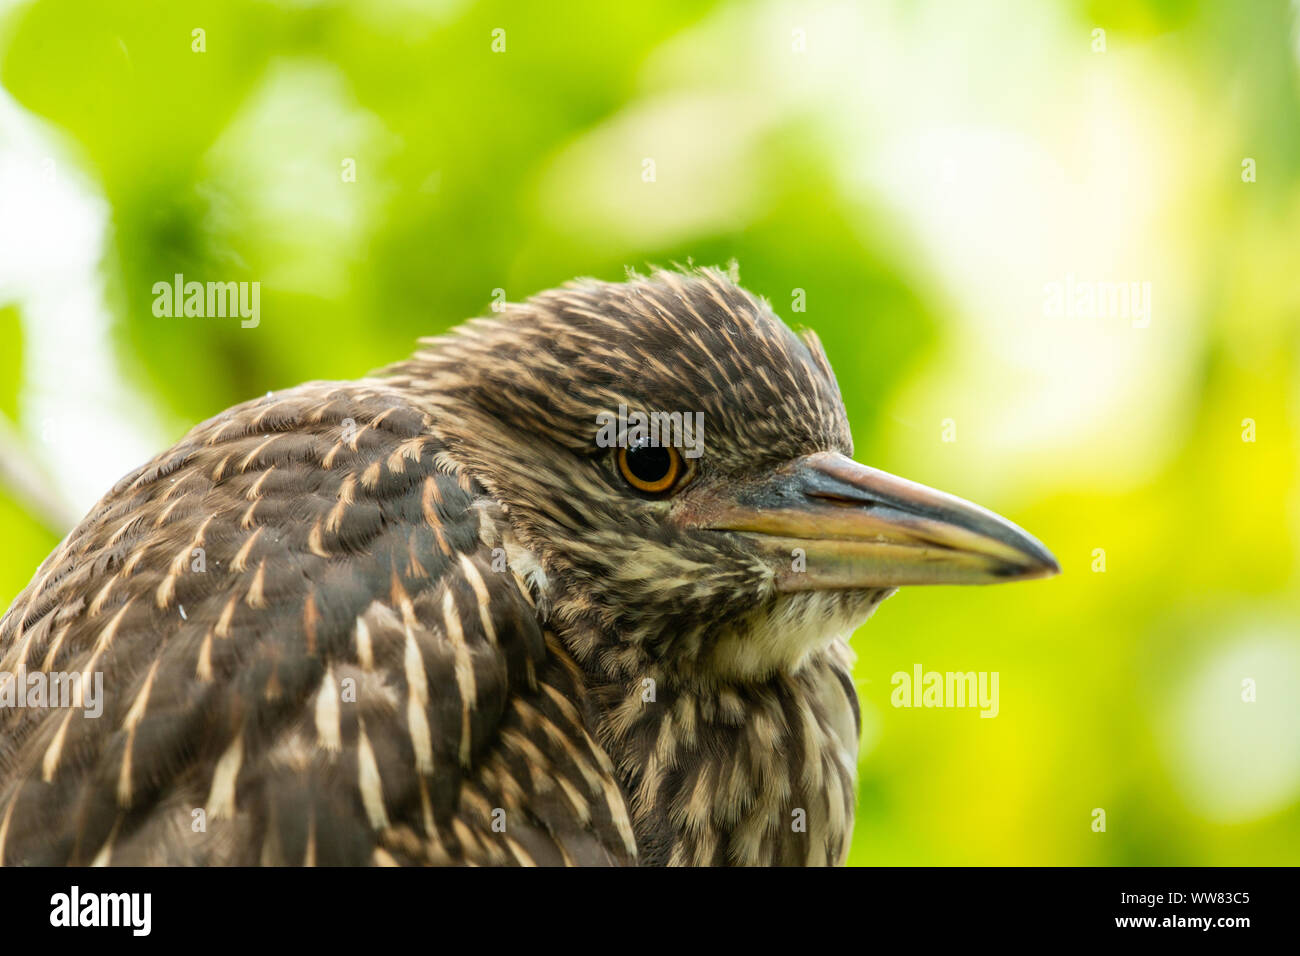 Juvenile Black-crowned night heron (Nycticorax nycticorax) at the Ellie Schiller Homosassa Springs Wildlife State Park, Florida, USA. Stock Photo